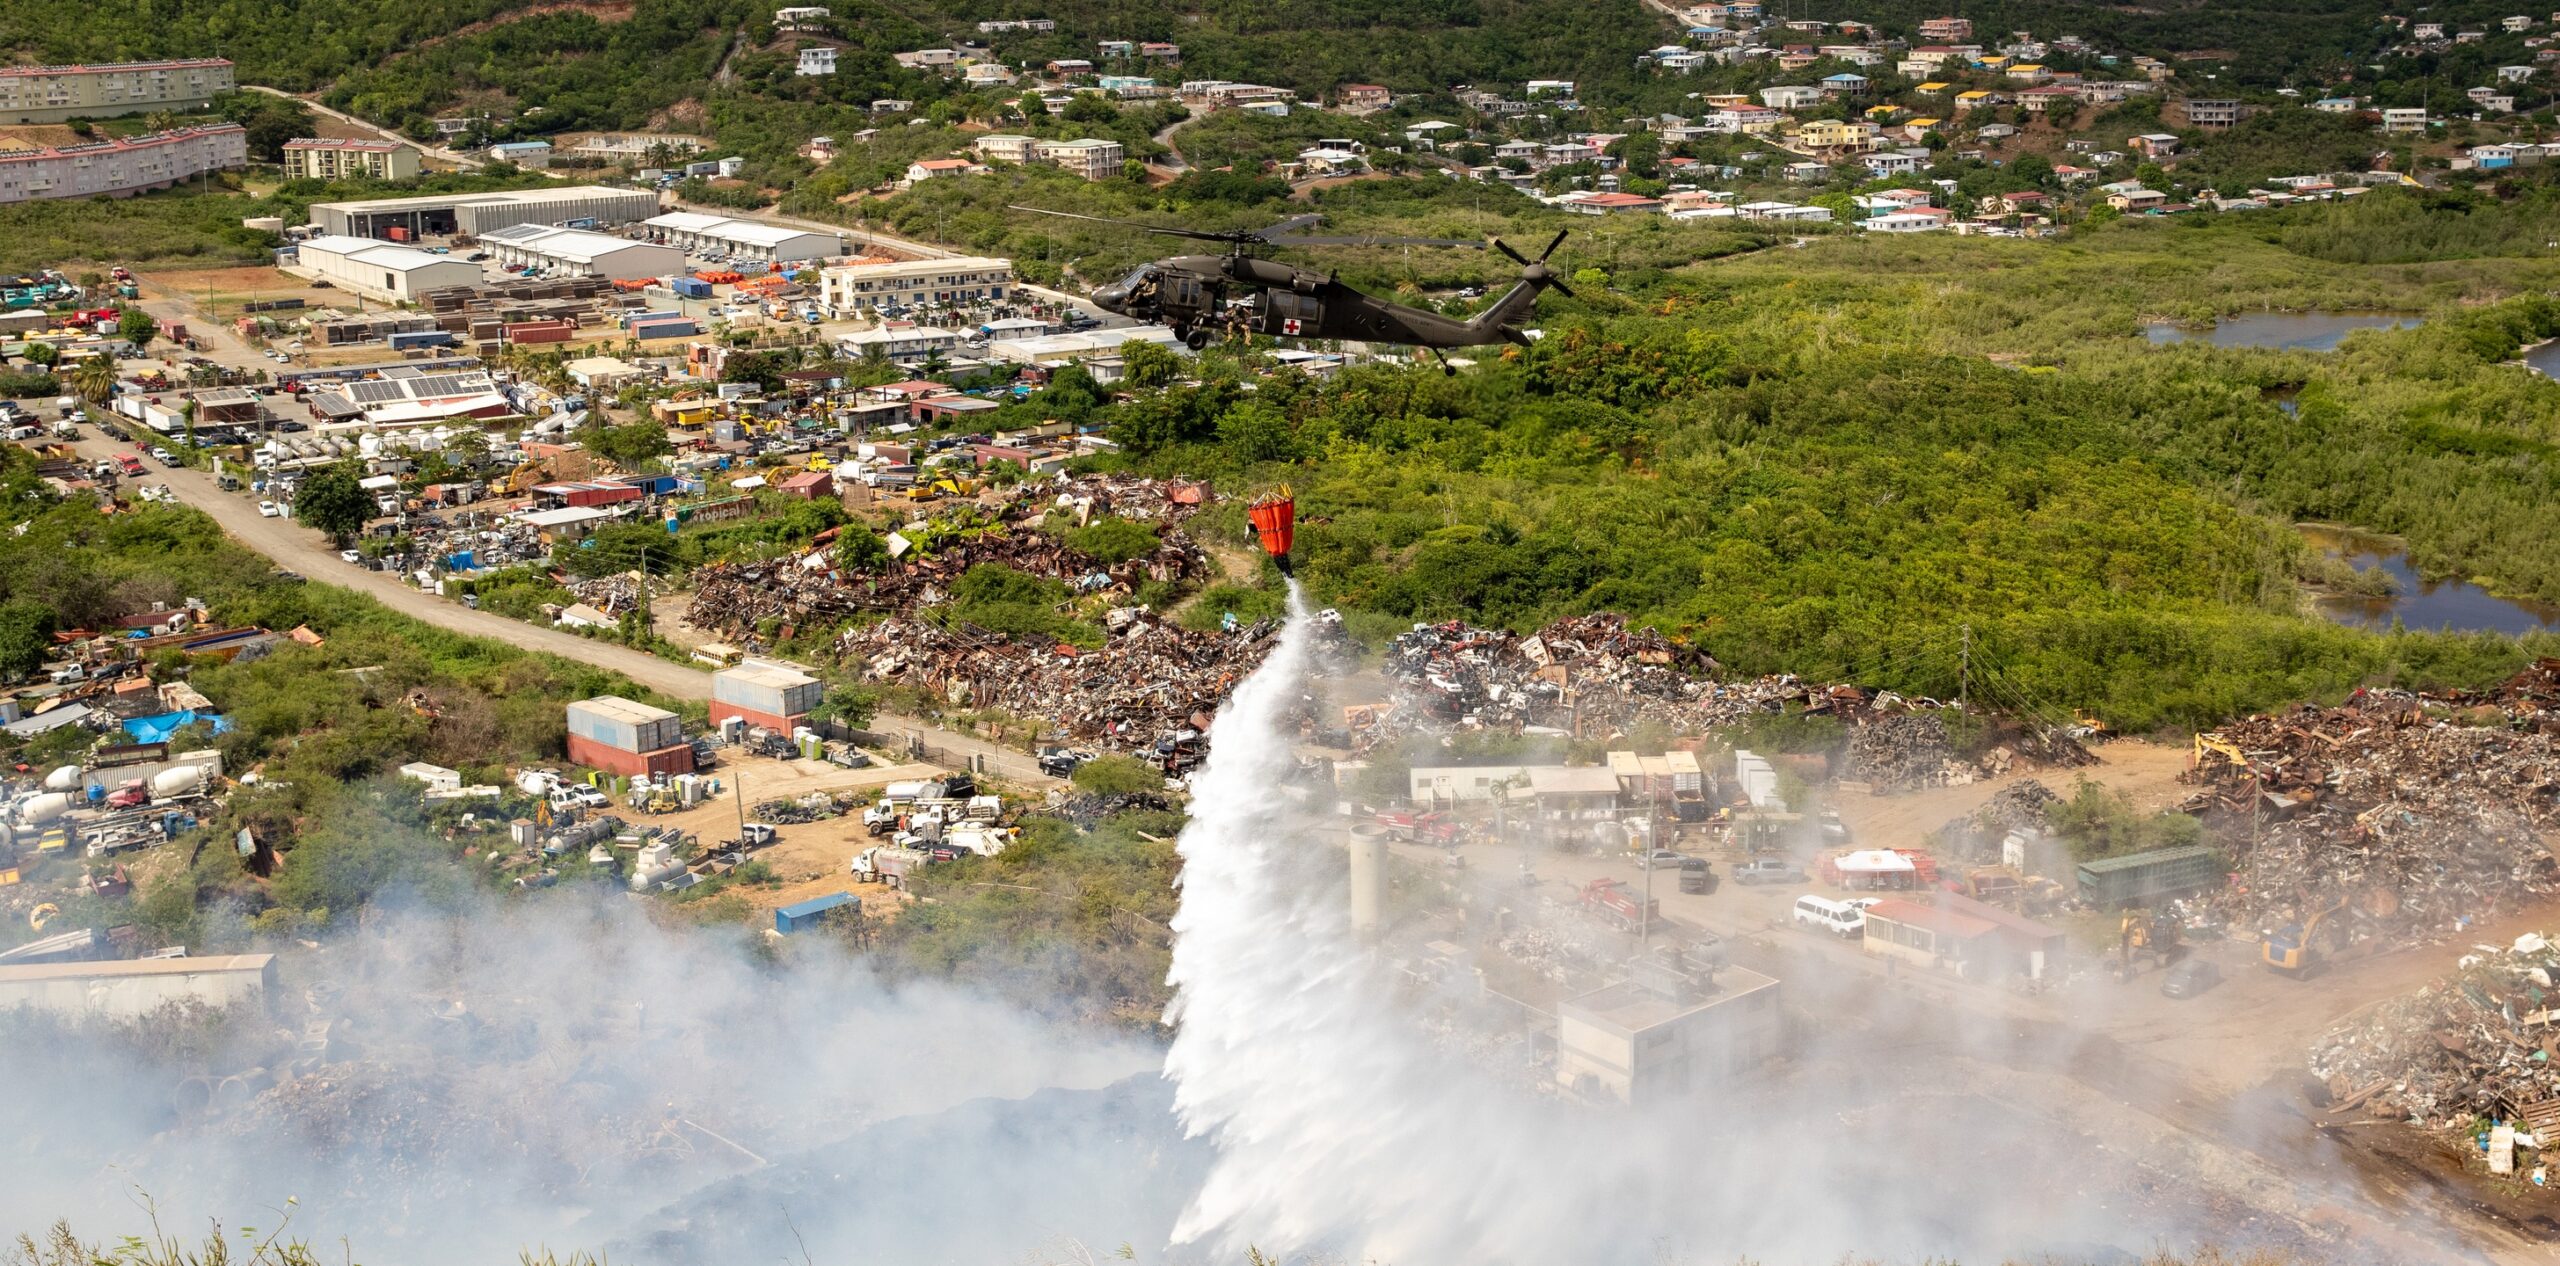 Crews with the Puerto Rico National Guard drop water on the Bovoni landfill fire on Wednesday. (Photo courtesy Government House)